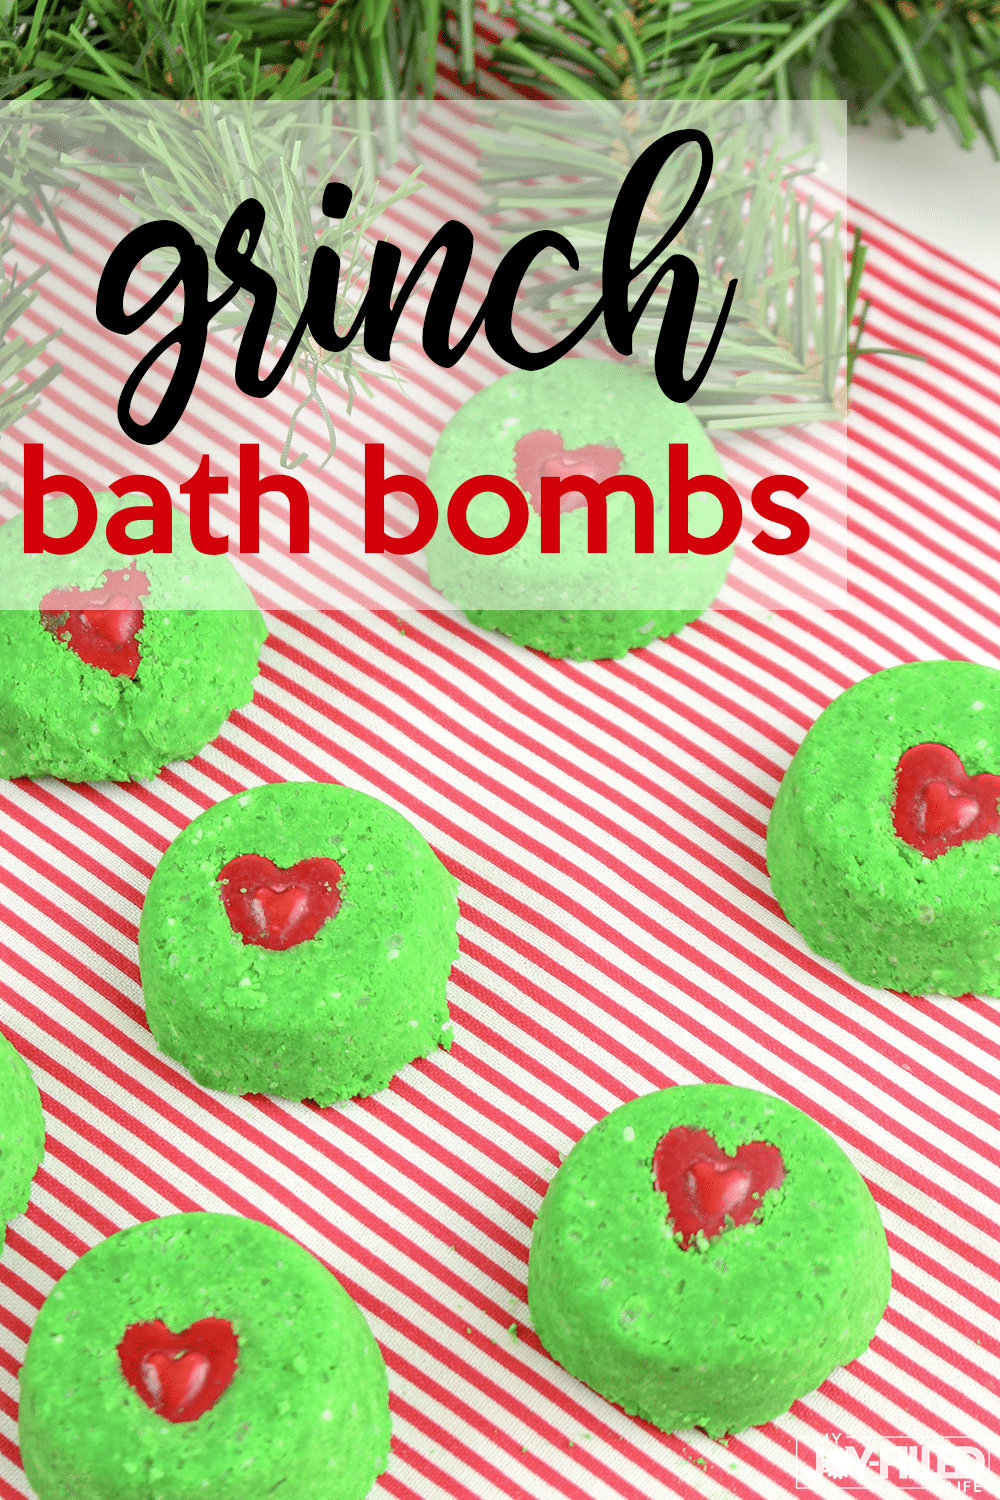 These grinch bath bombs are pretty easy to make and can even make a great Christmas gift for friends and family. #thegrinch #grinch #bathbombs #christmas 